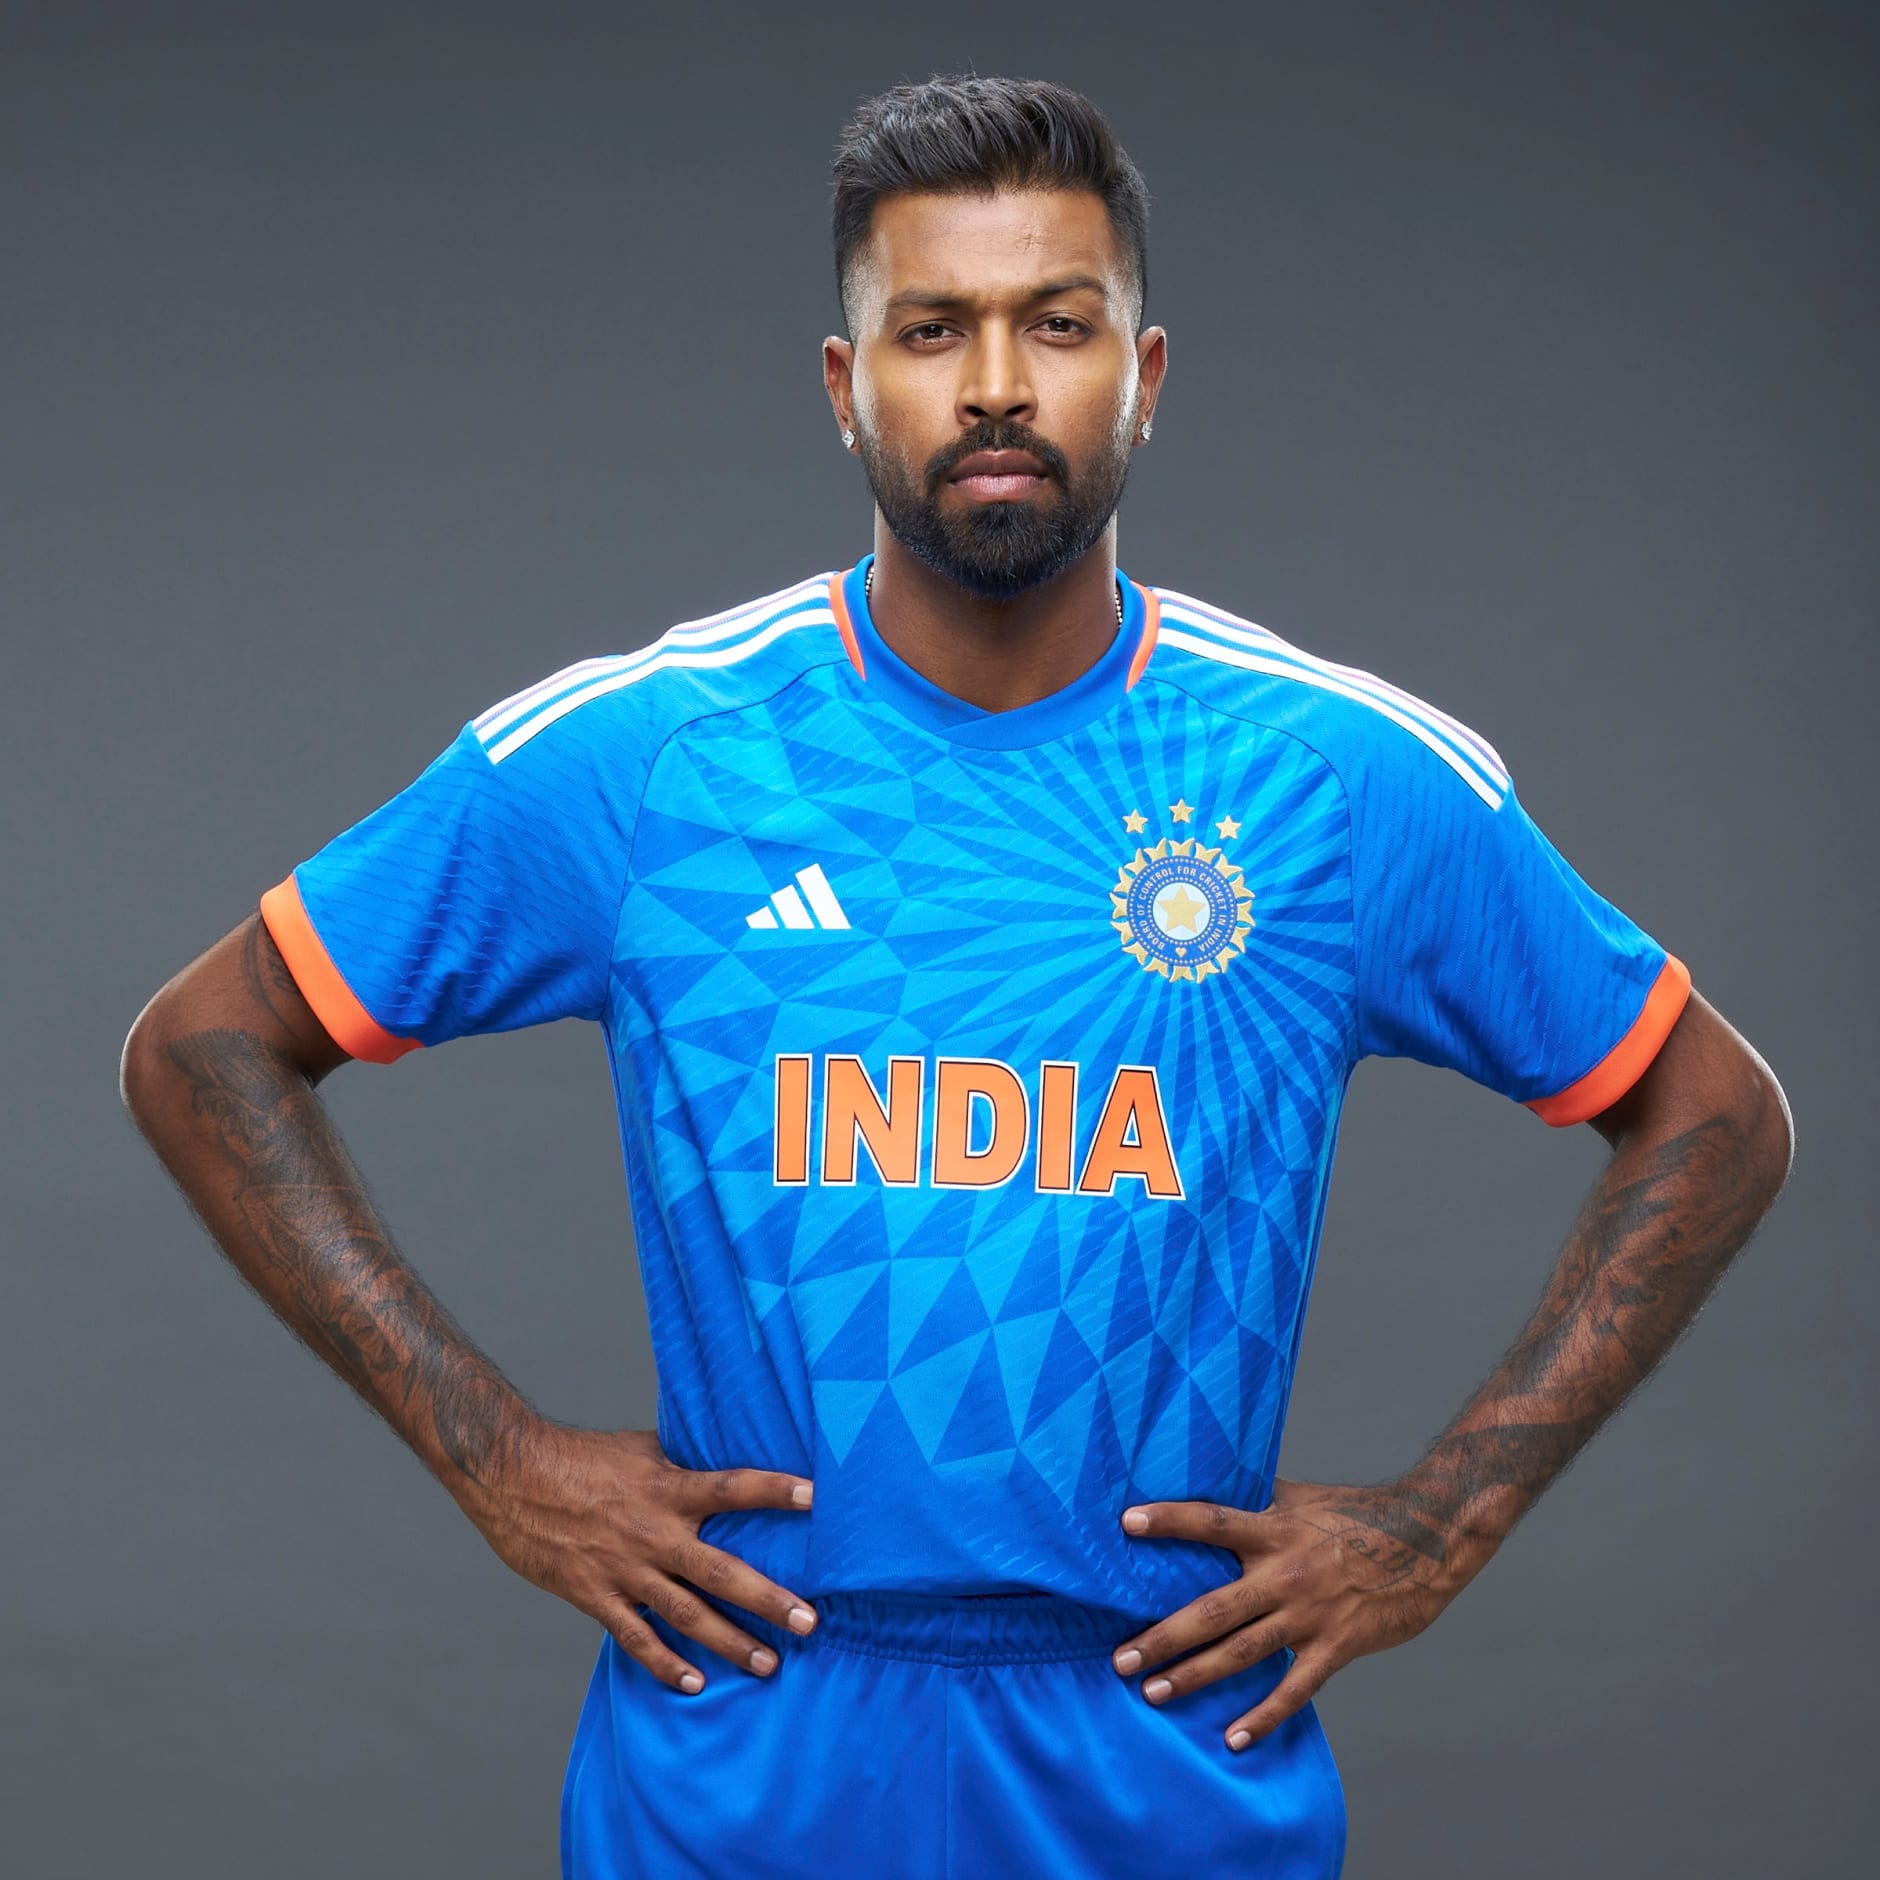 1996 India Jersey - My Sports Jersey - India World Cup Jersey